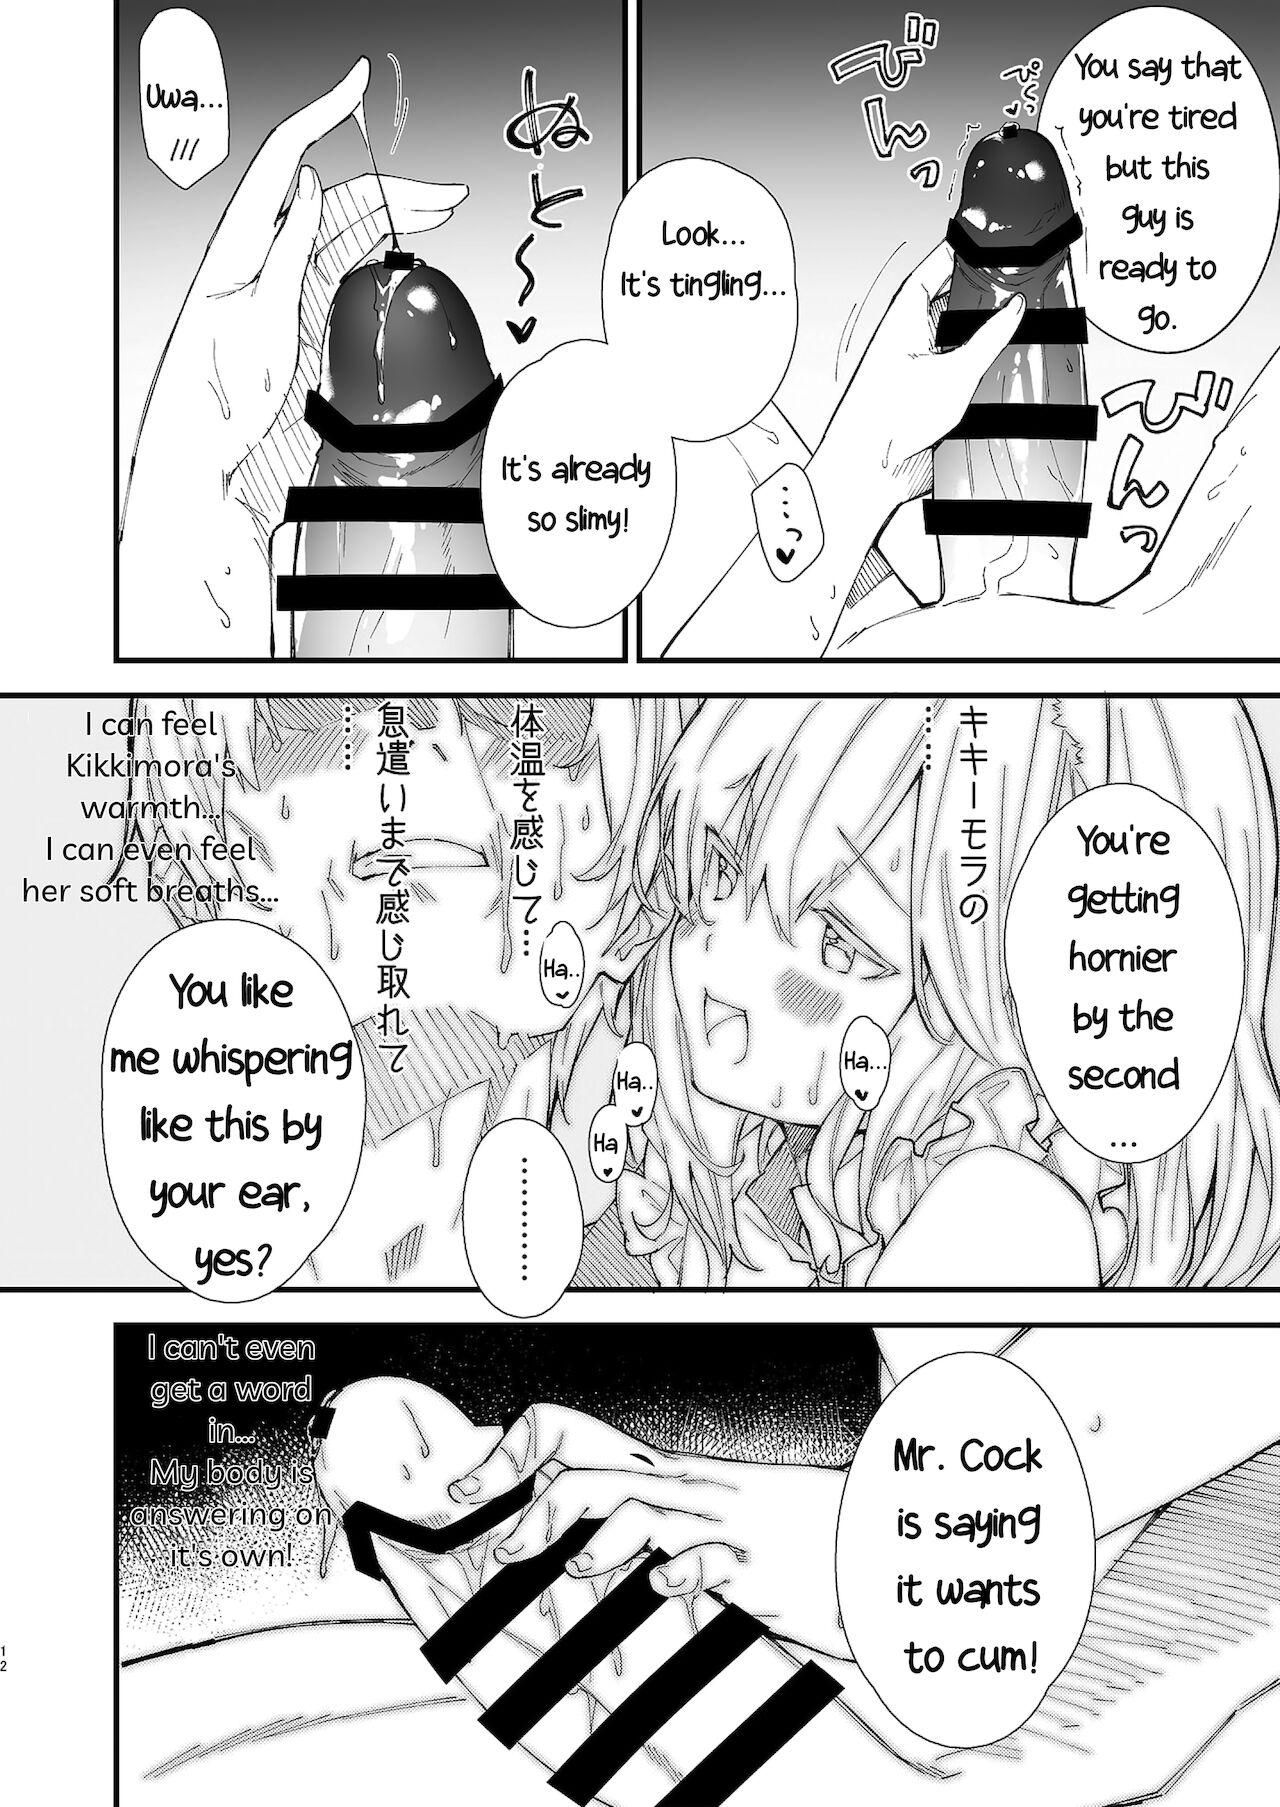 Foot Fetish Kemomimi Maid to Ichaicha suru Hon | A Book about making out with a Kemonomimi Maid - Original Chastity - Page 10